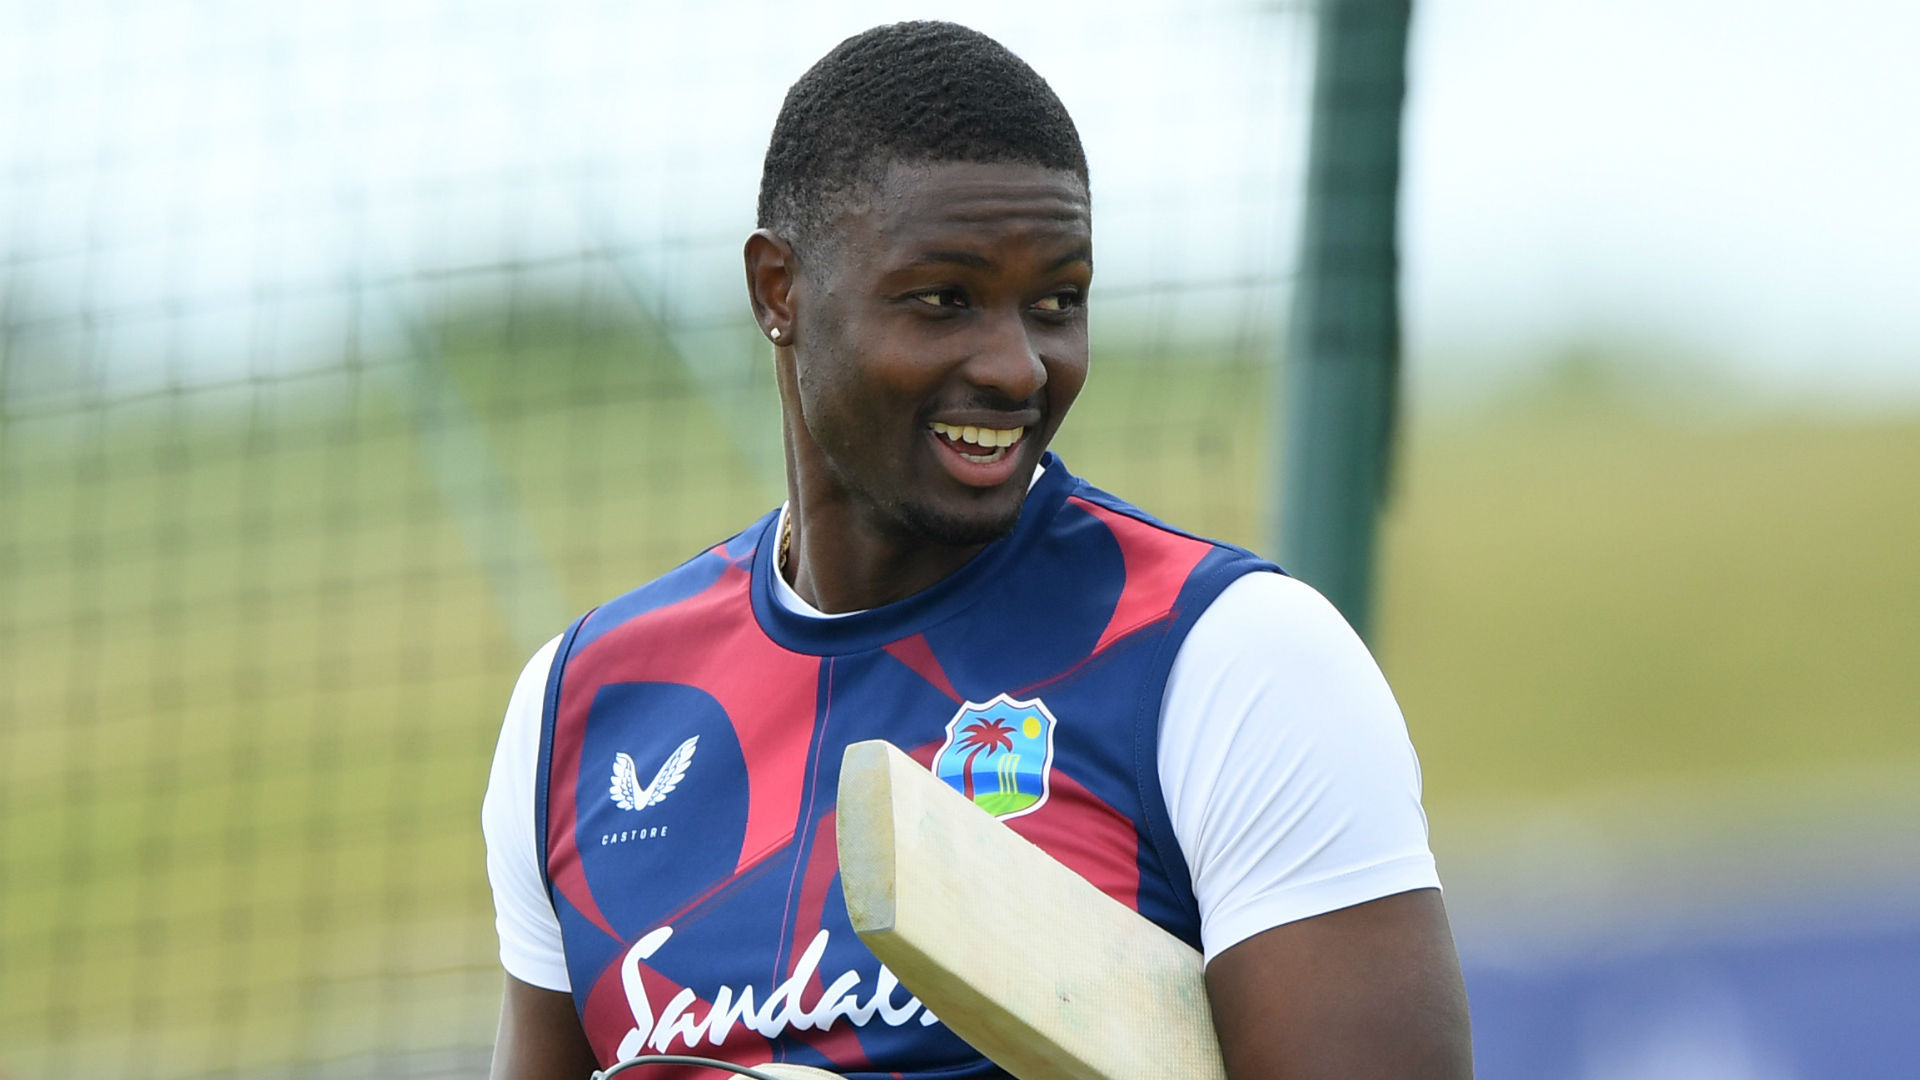 Jason Holder has been impressed with how West Indies have prepared to face England, who will have Ben Stokes in charge at Southampton.